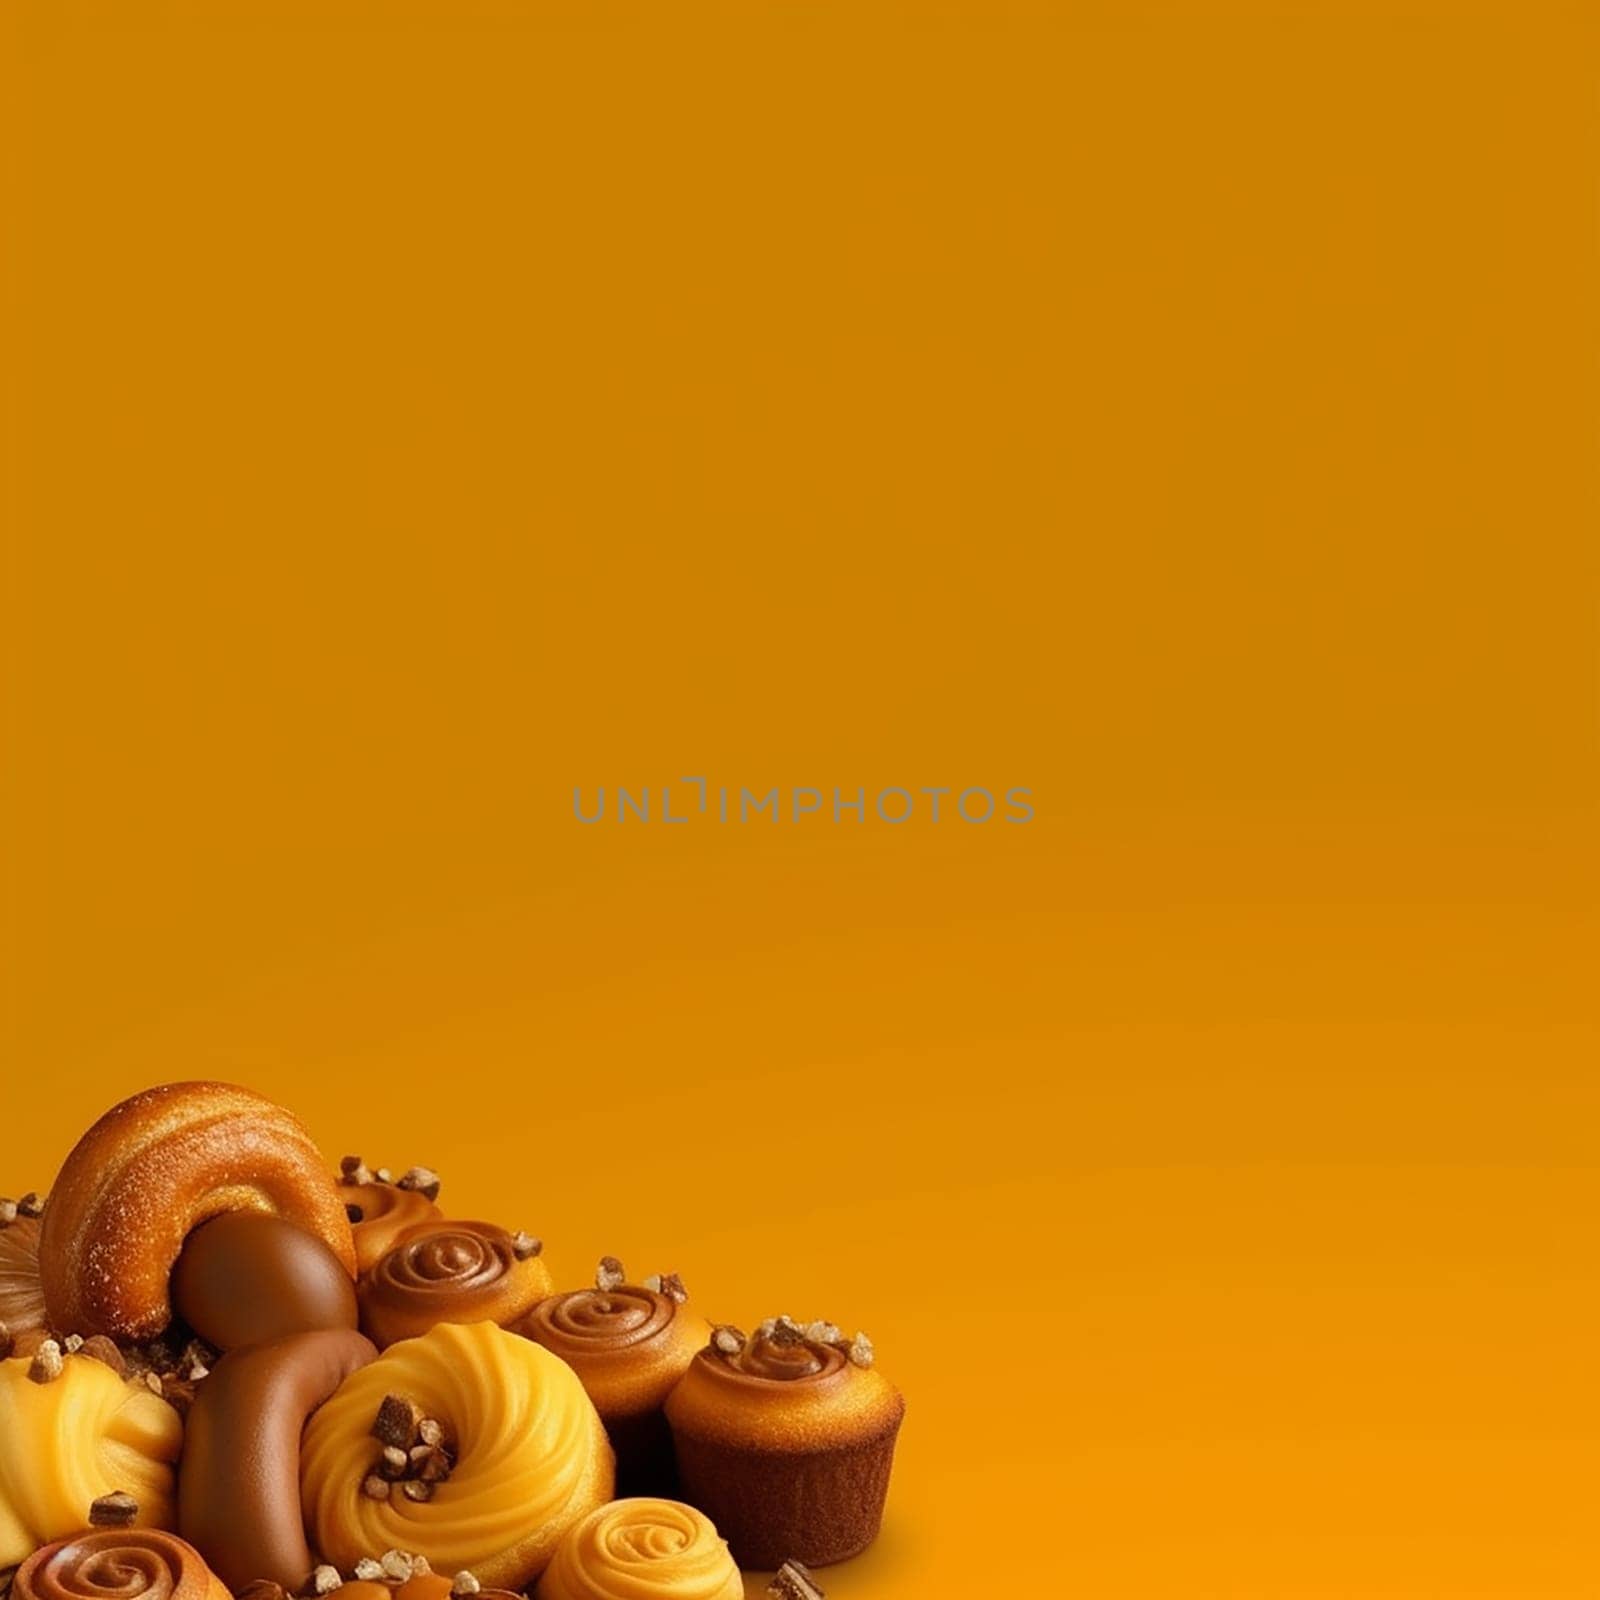 Assorted pastries with chocolate on a yellow background. by Hype2art